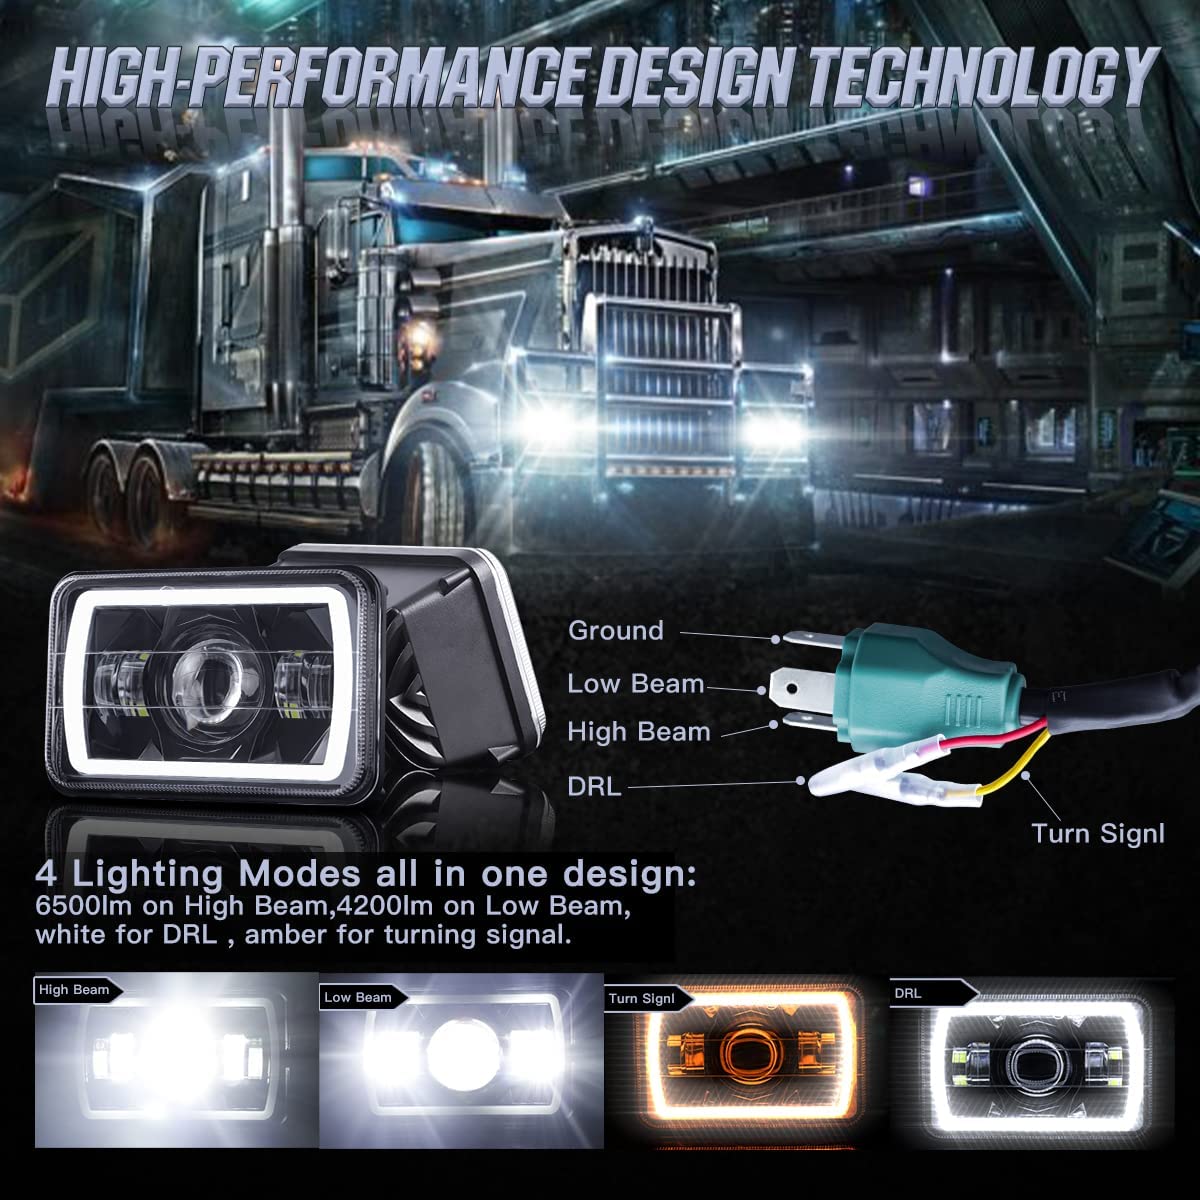 4x6 LED Headlights 2PCS High and Low Sealed Beam with DRL Halo Turn Signal Rectangular Headlight H4651 H4652 H4656 H4666 H6545 H4668 H4642